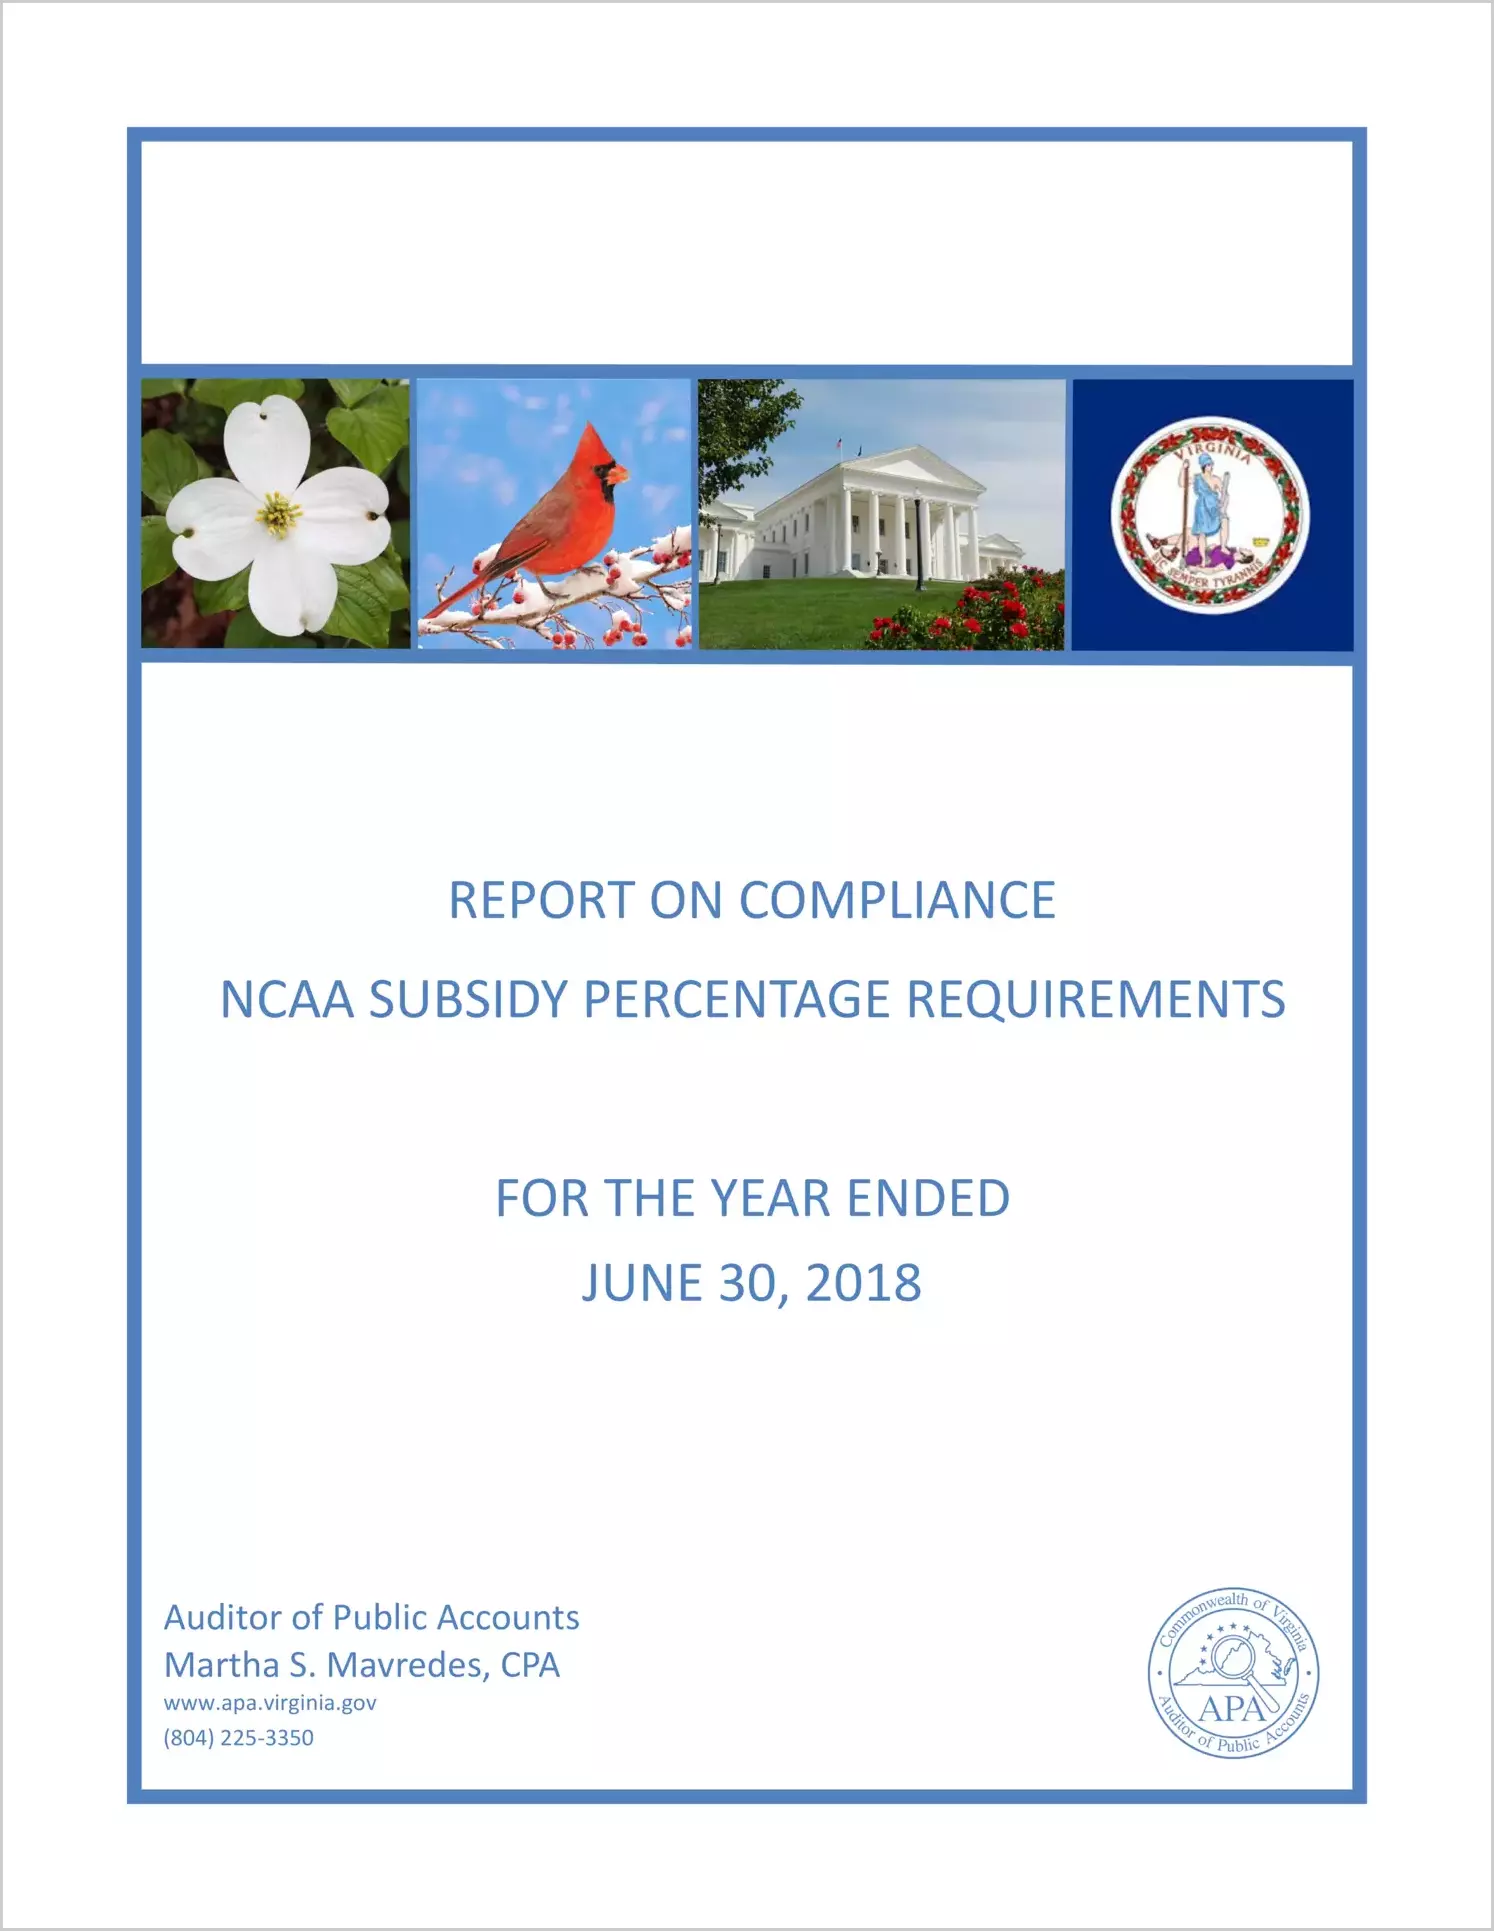 Report on Compliance - NCAA Subsidy Percentage Requirements for the year ended June 30, 2018